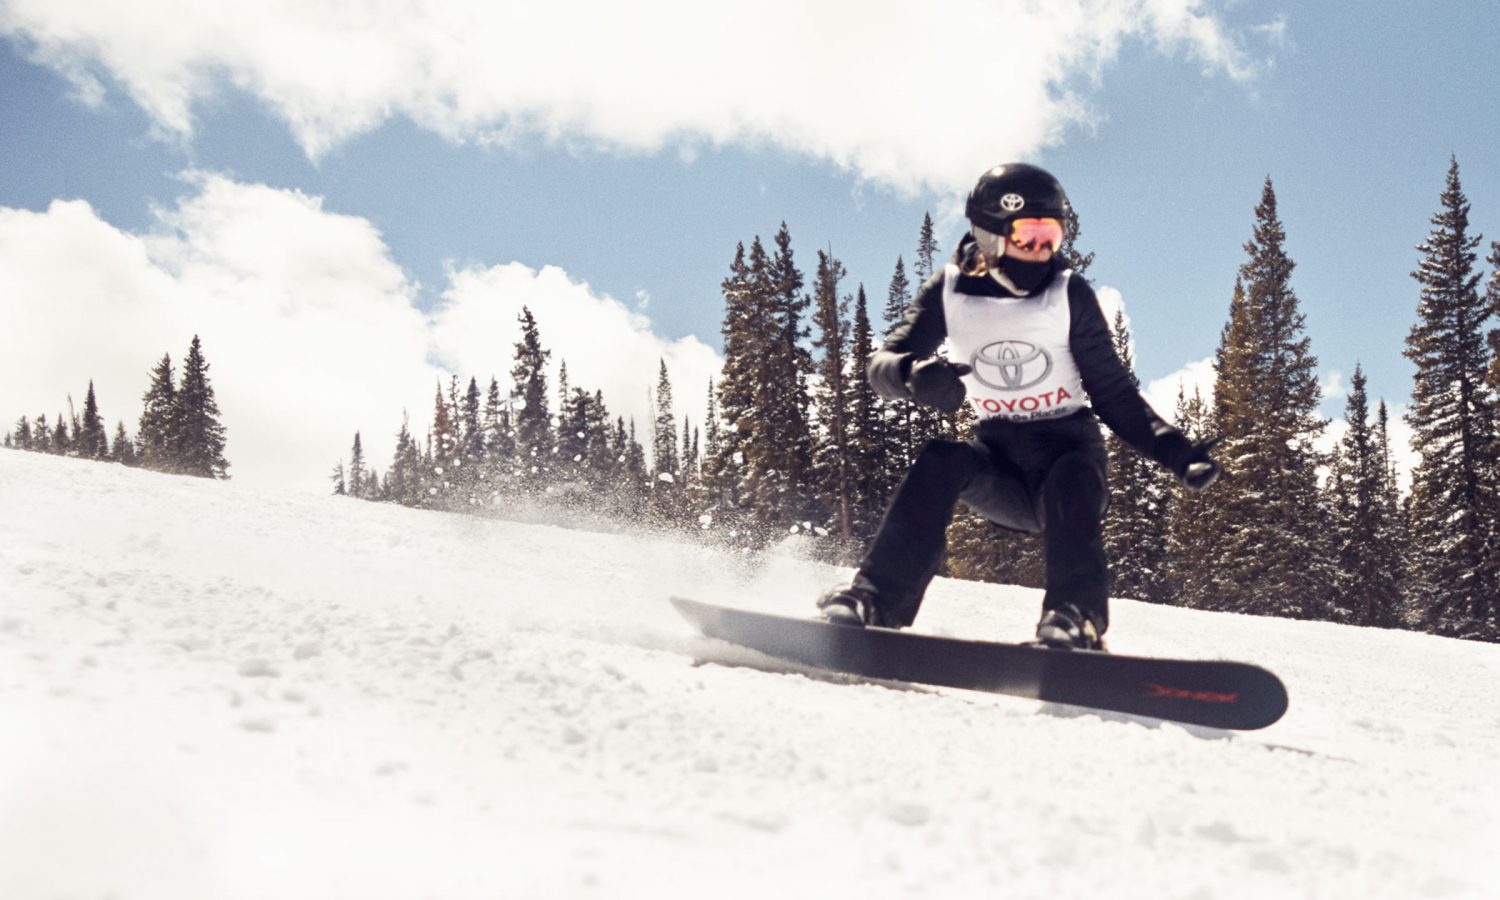 Paralympian snowboarder Amy Purdy’s Adaptive Action Sports (AAS) will get a jump-start from Toyota